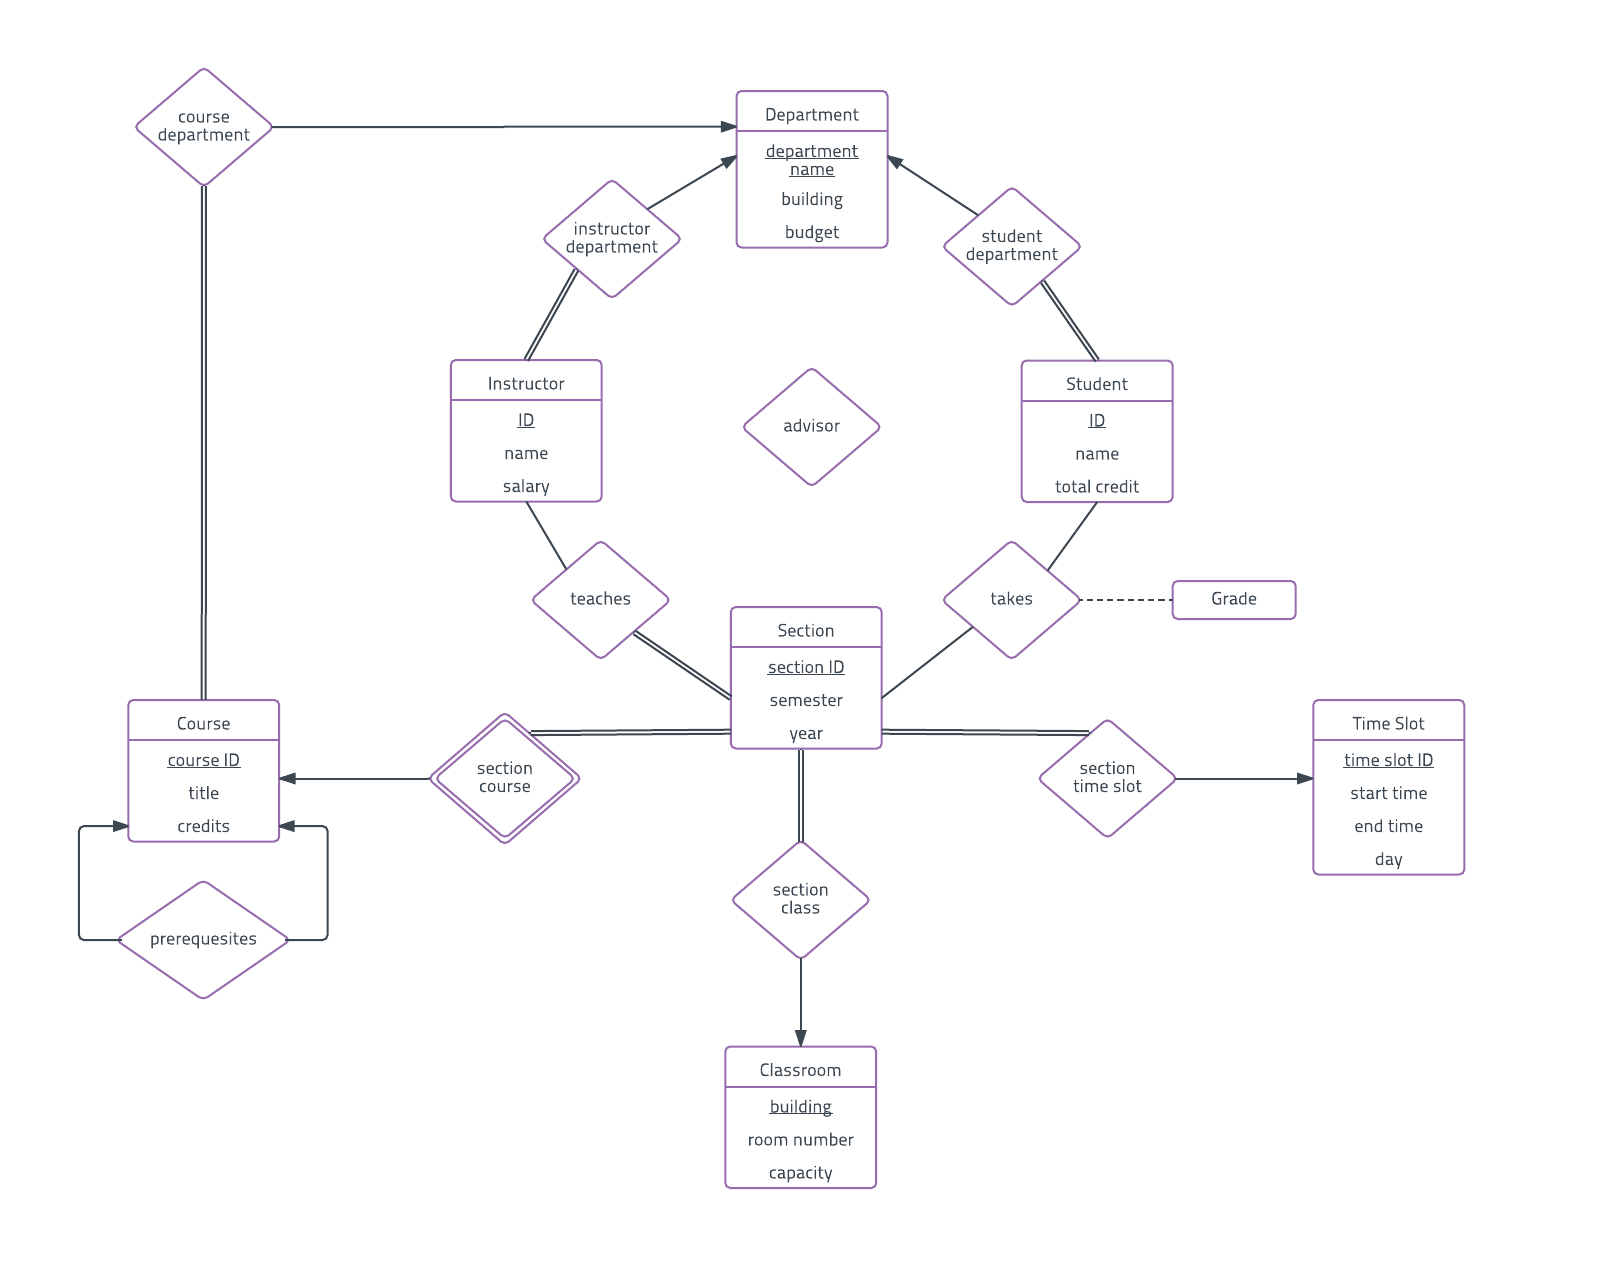 Er Diagram Examples And Templates | Lucidchart in Er Diagram Examples Chen